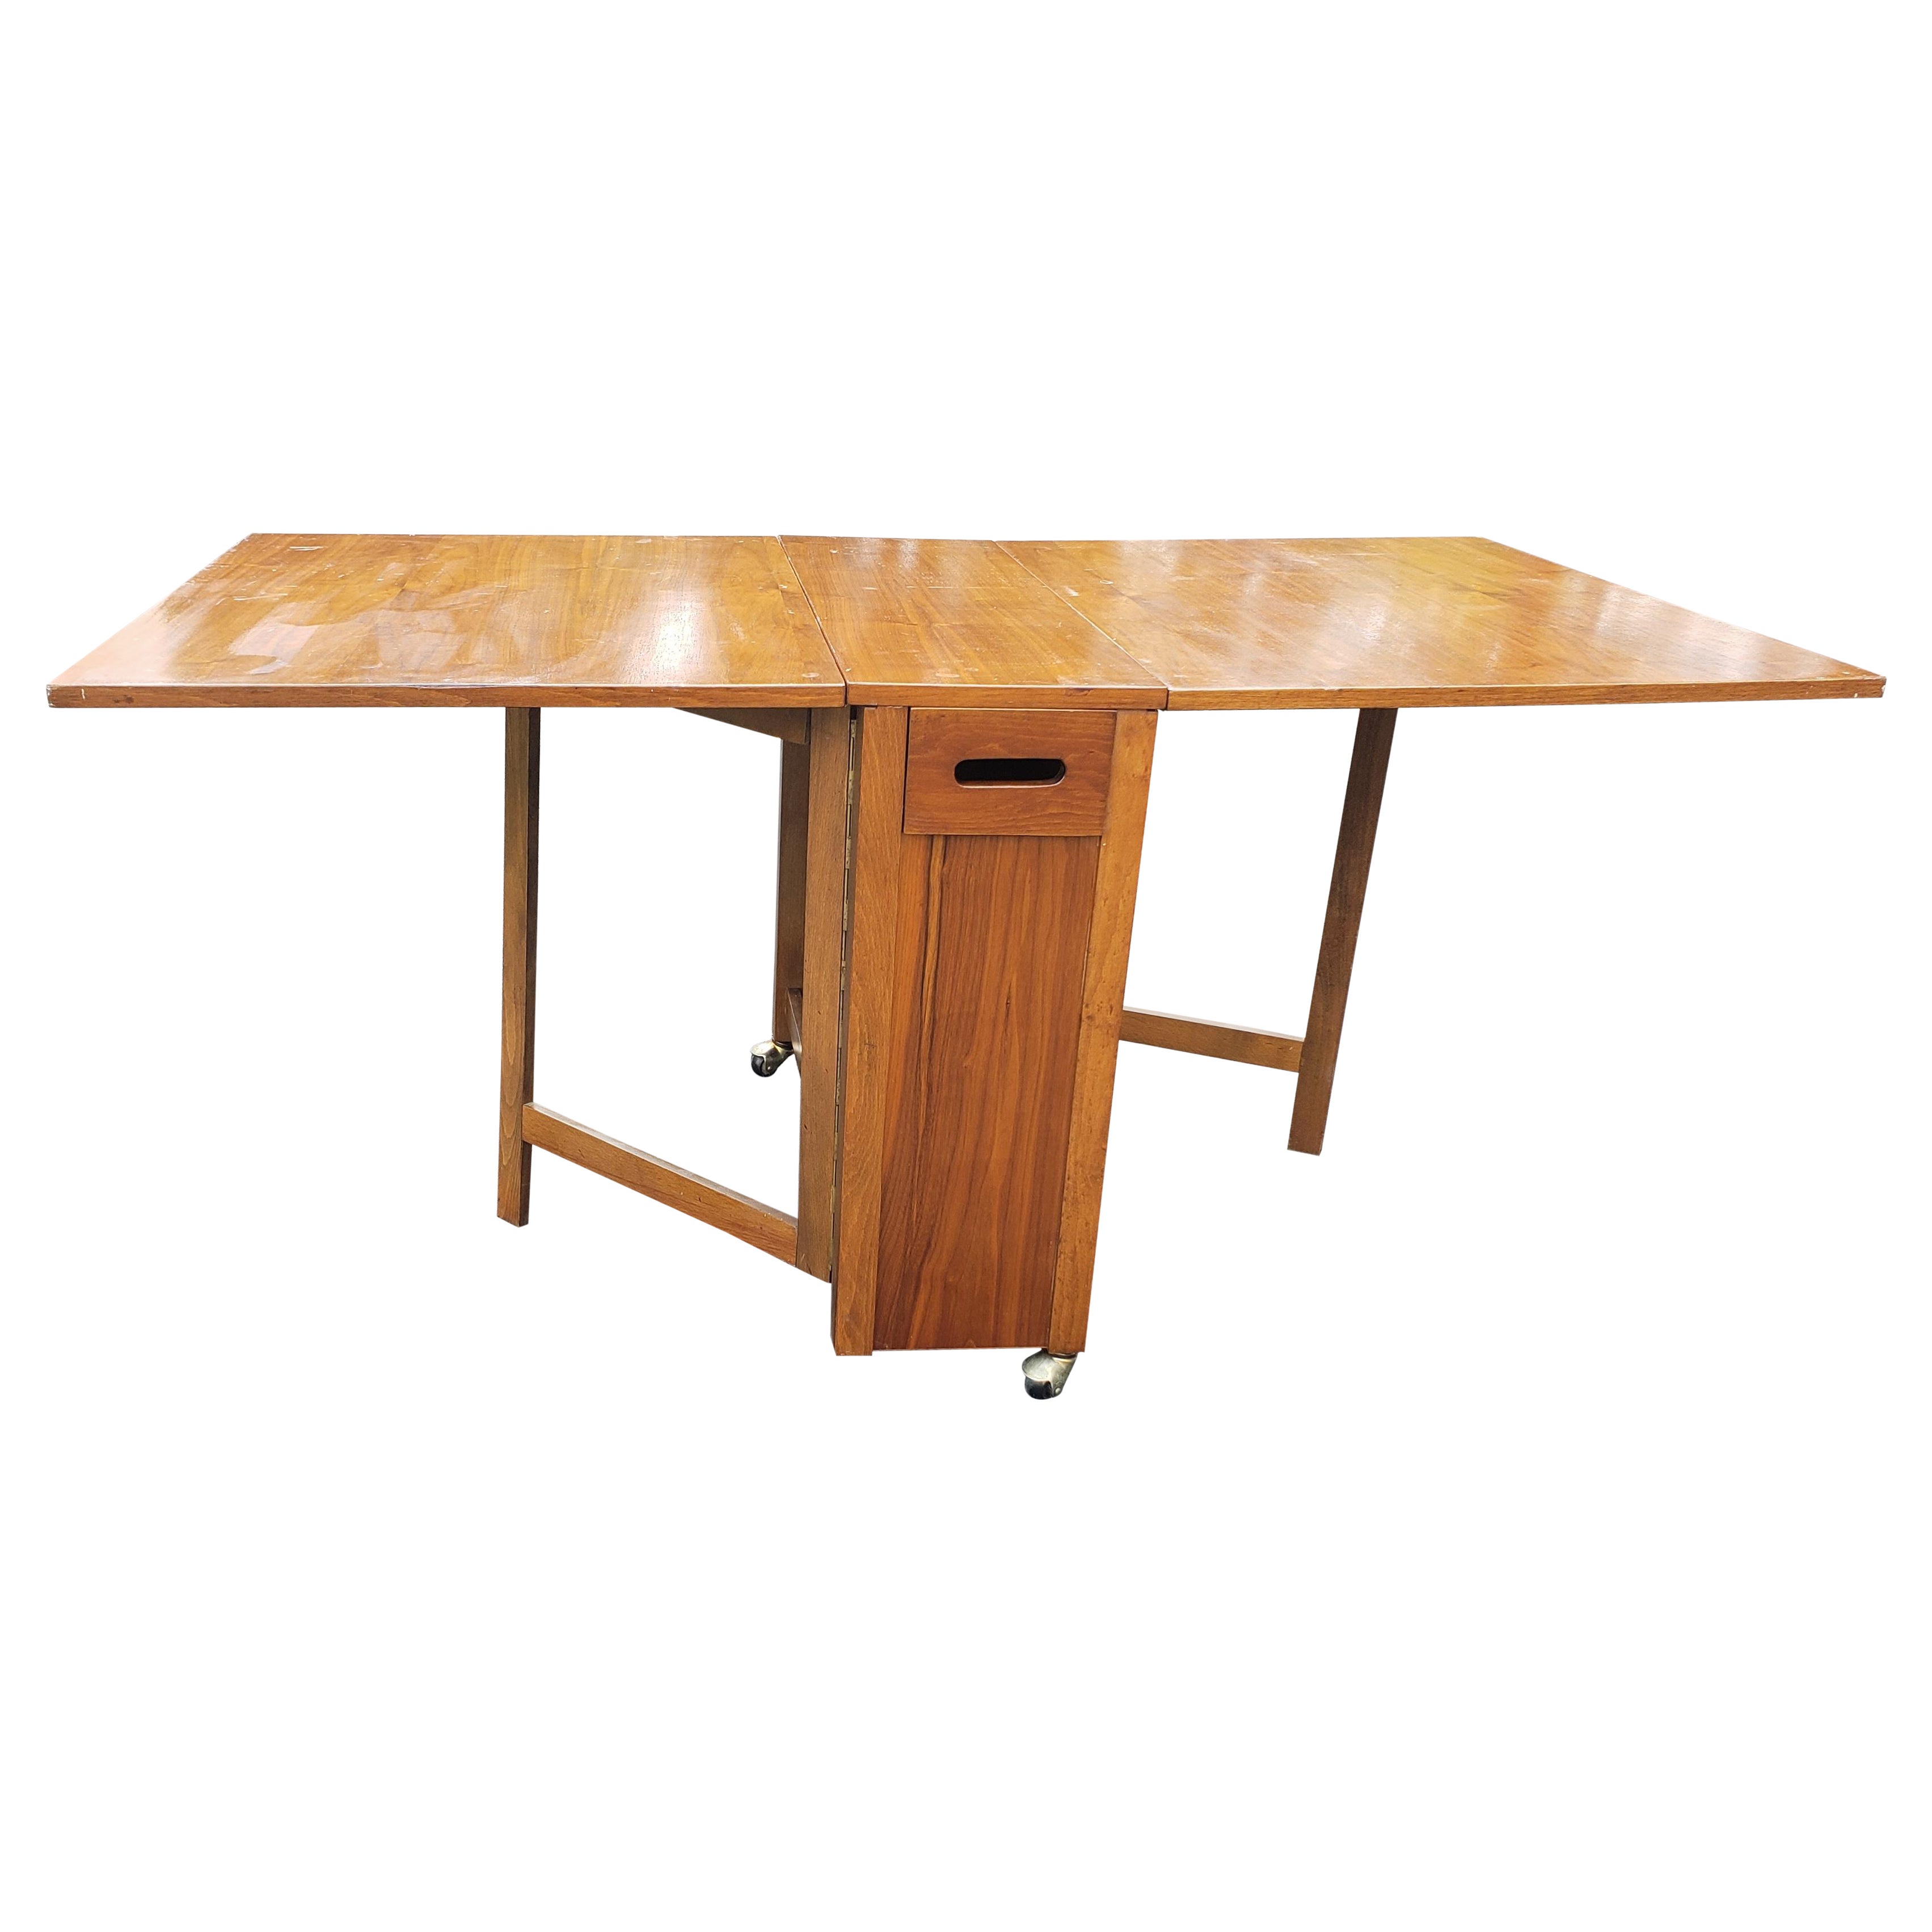 Mid-Century Danish Modern Teak Drop-Leaf Dining Table with Storage on Rollers For Sale